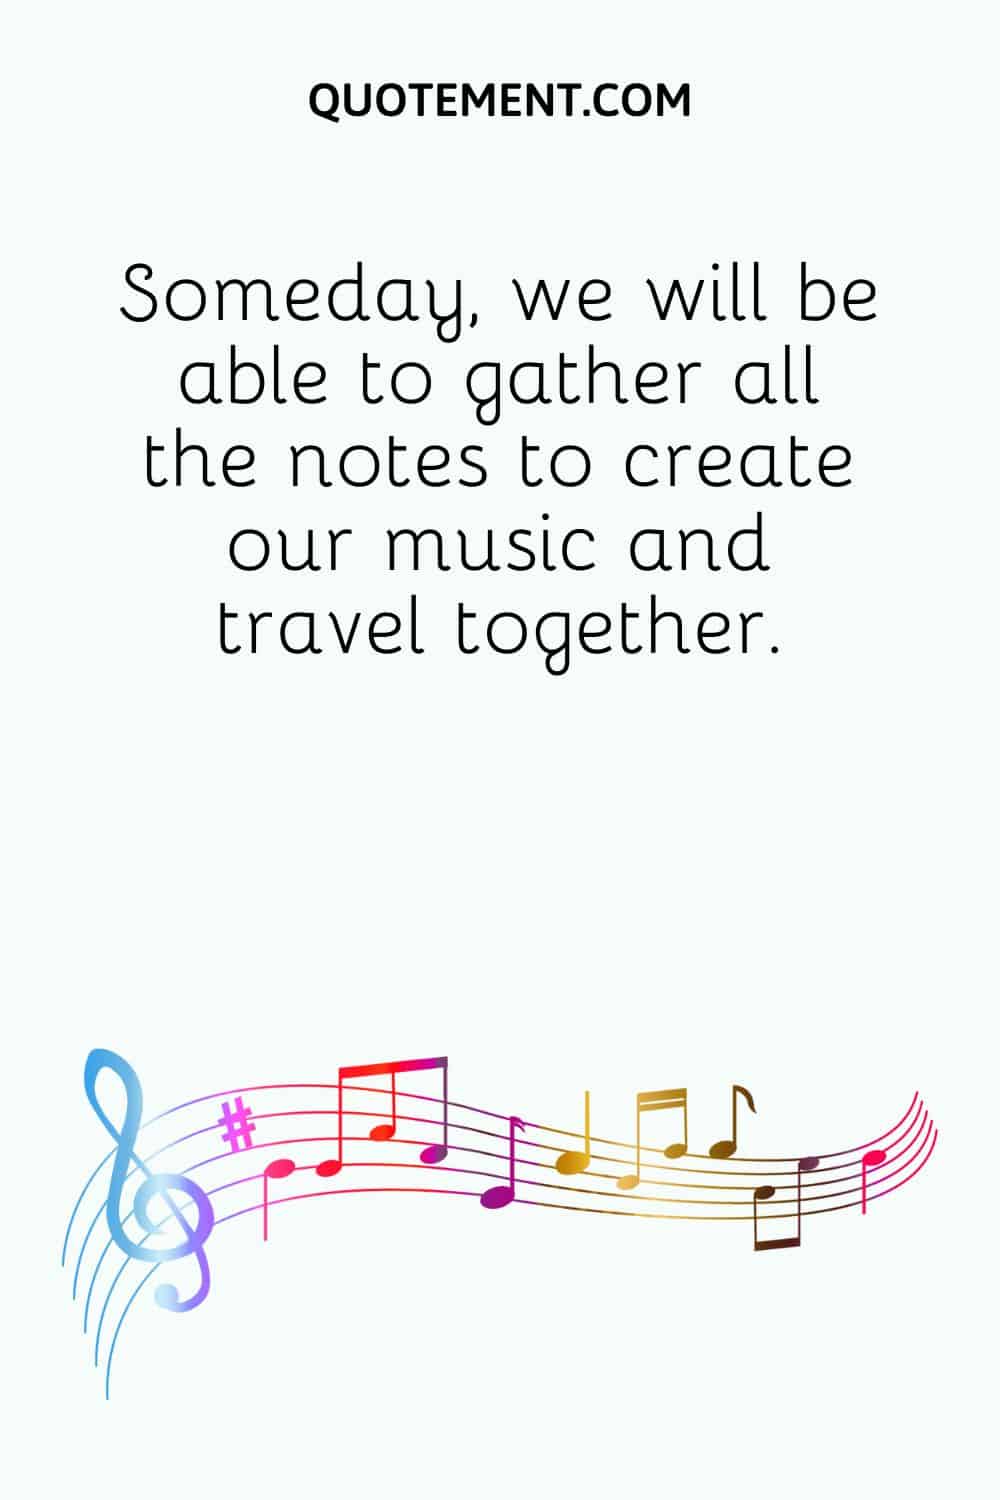 Someday, we will be able to gather all the notes to create our music and travel together